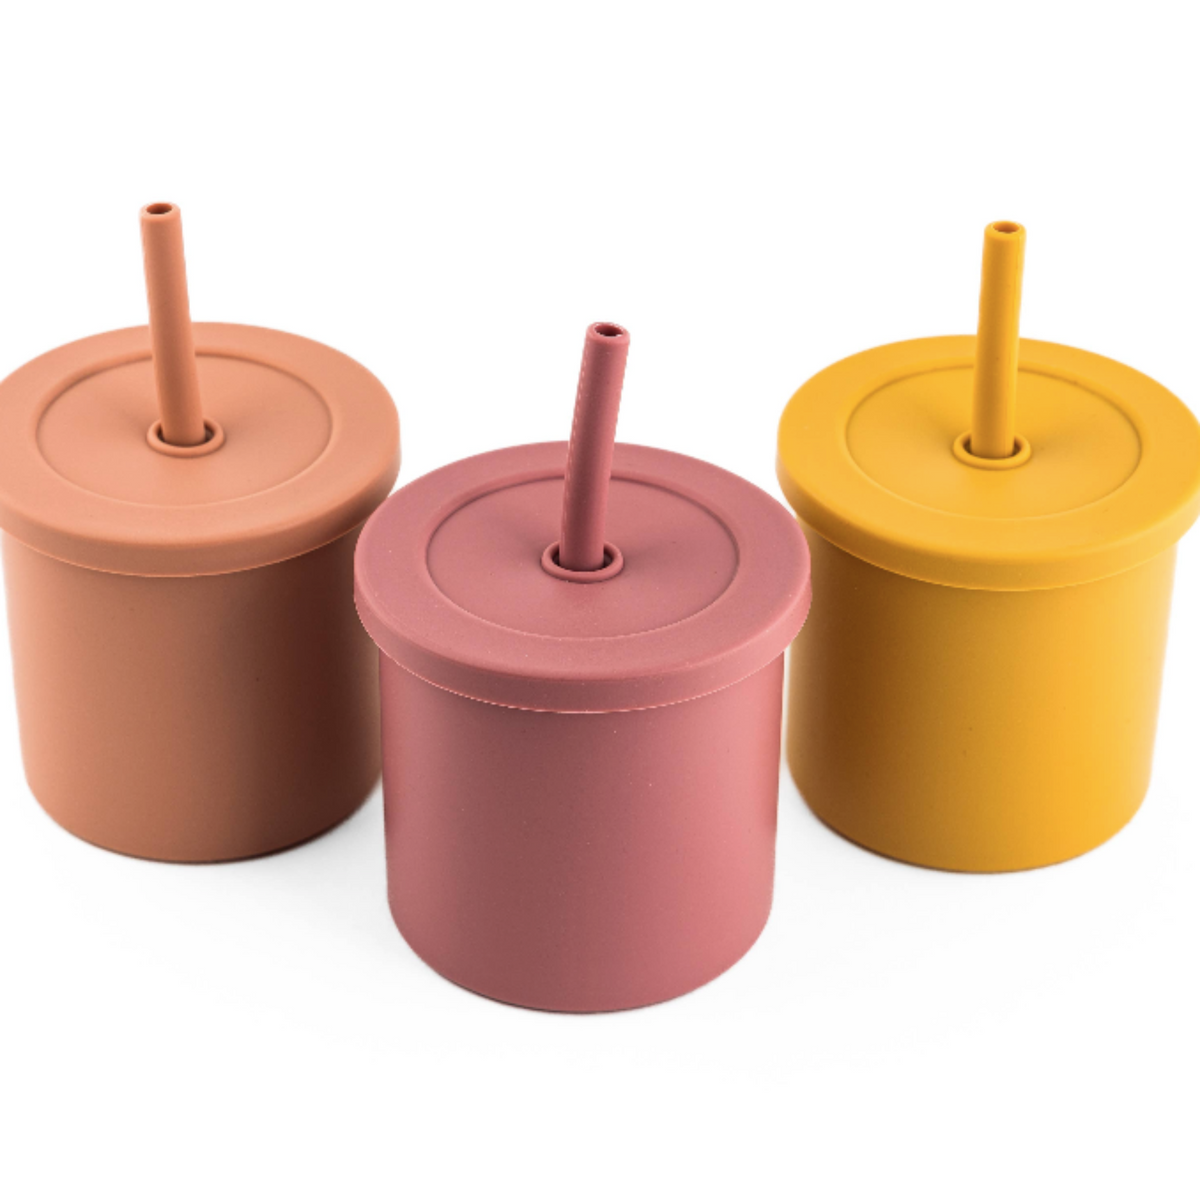 2 in 1 Straw Cup and Snack Container - Warm Tones: Pink